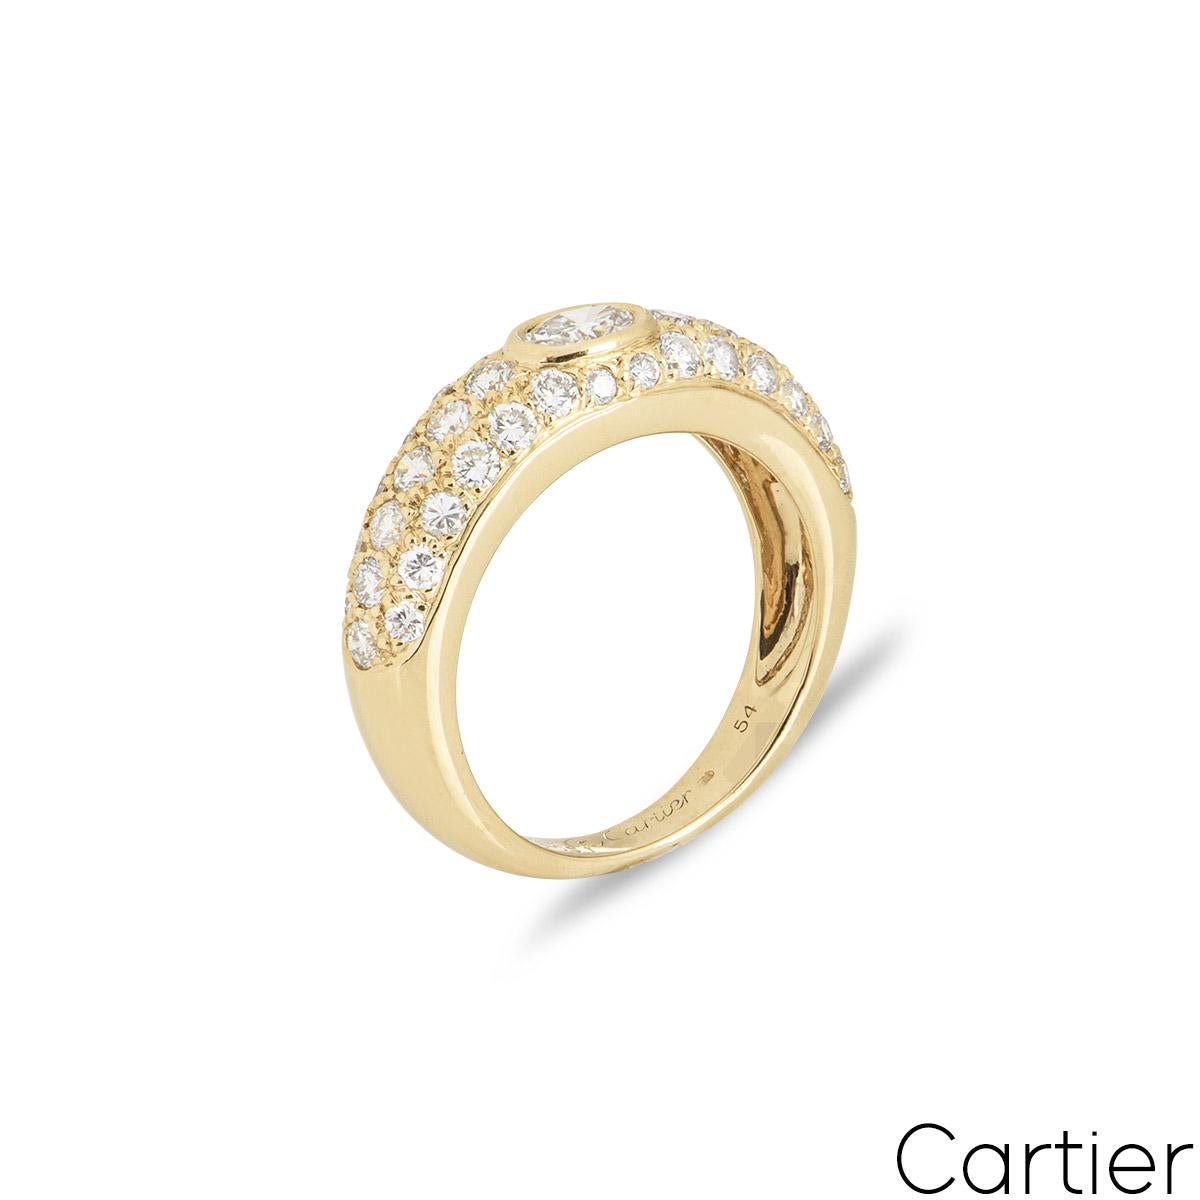 A timeless 18k yellow gold diamond ring by Cartier from the Mimi collection. The bombe style ring is set to the centre with an oval cut diamond in a bezel mount, weighing approximately 0.50ct, G colour and VS1 clarity. The central diamond is